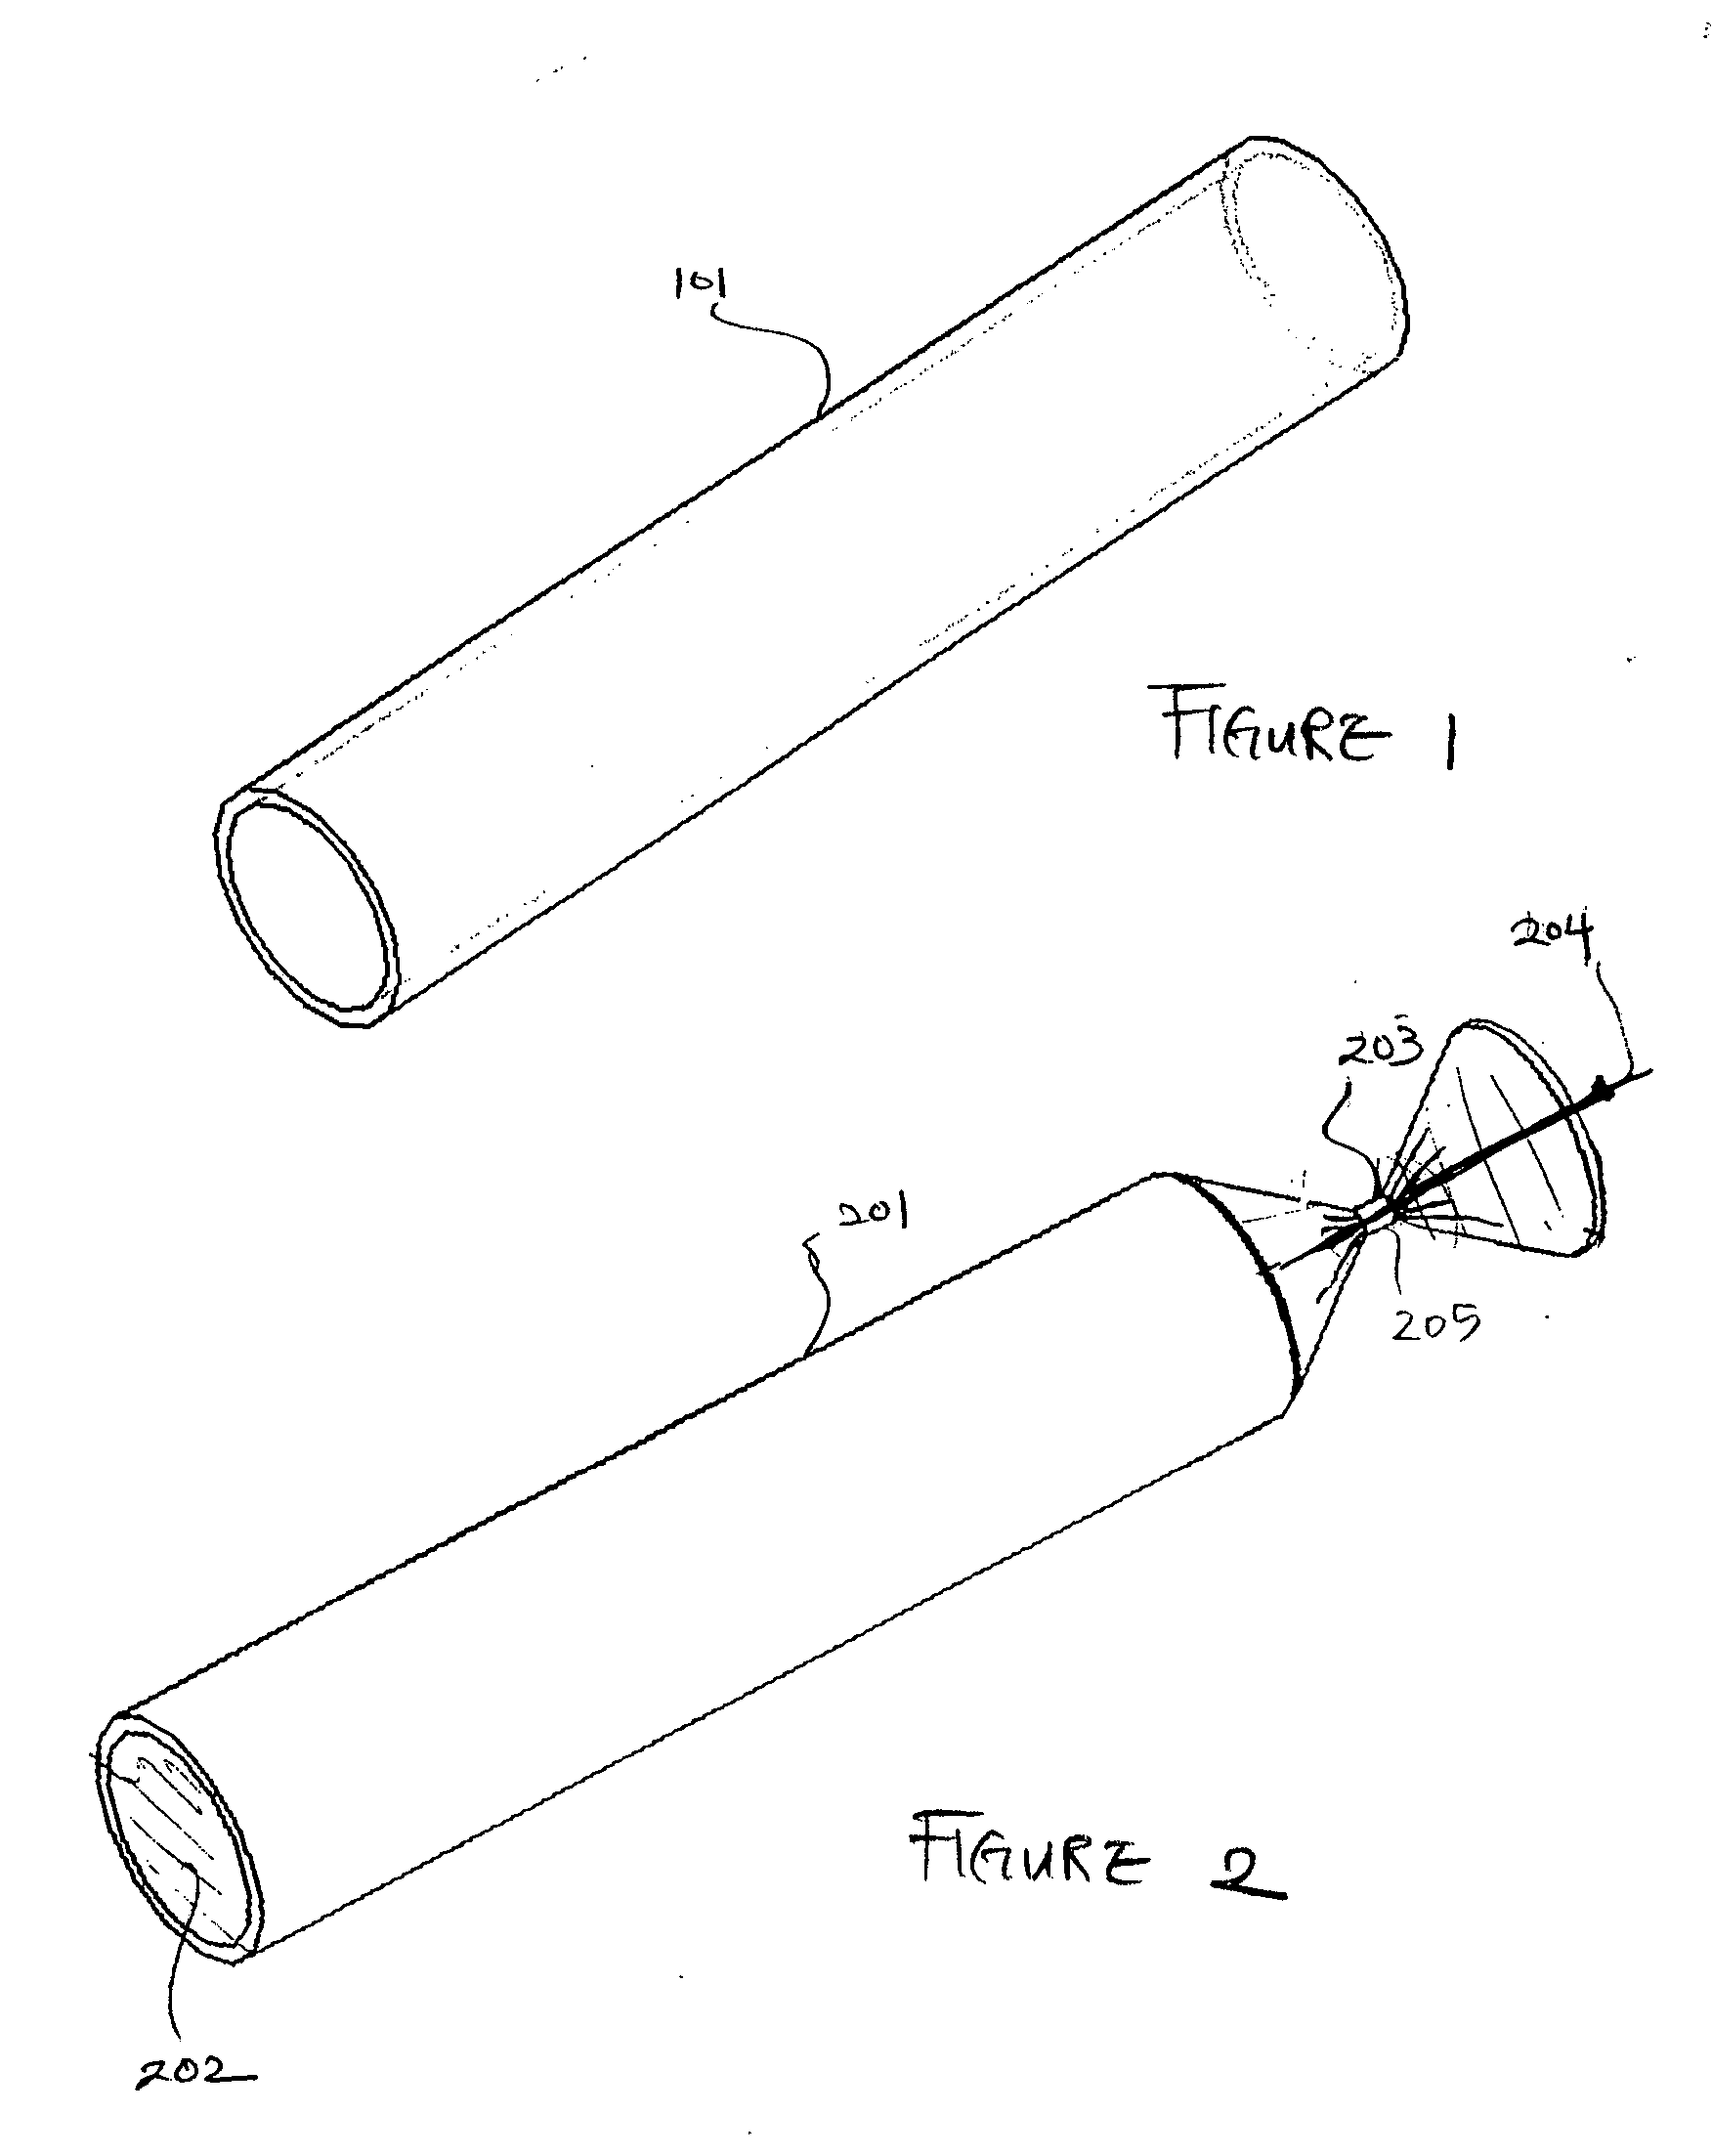 Encapsulation device and methods of use